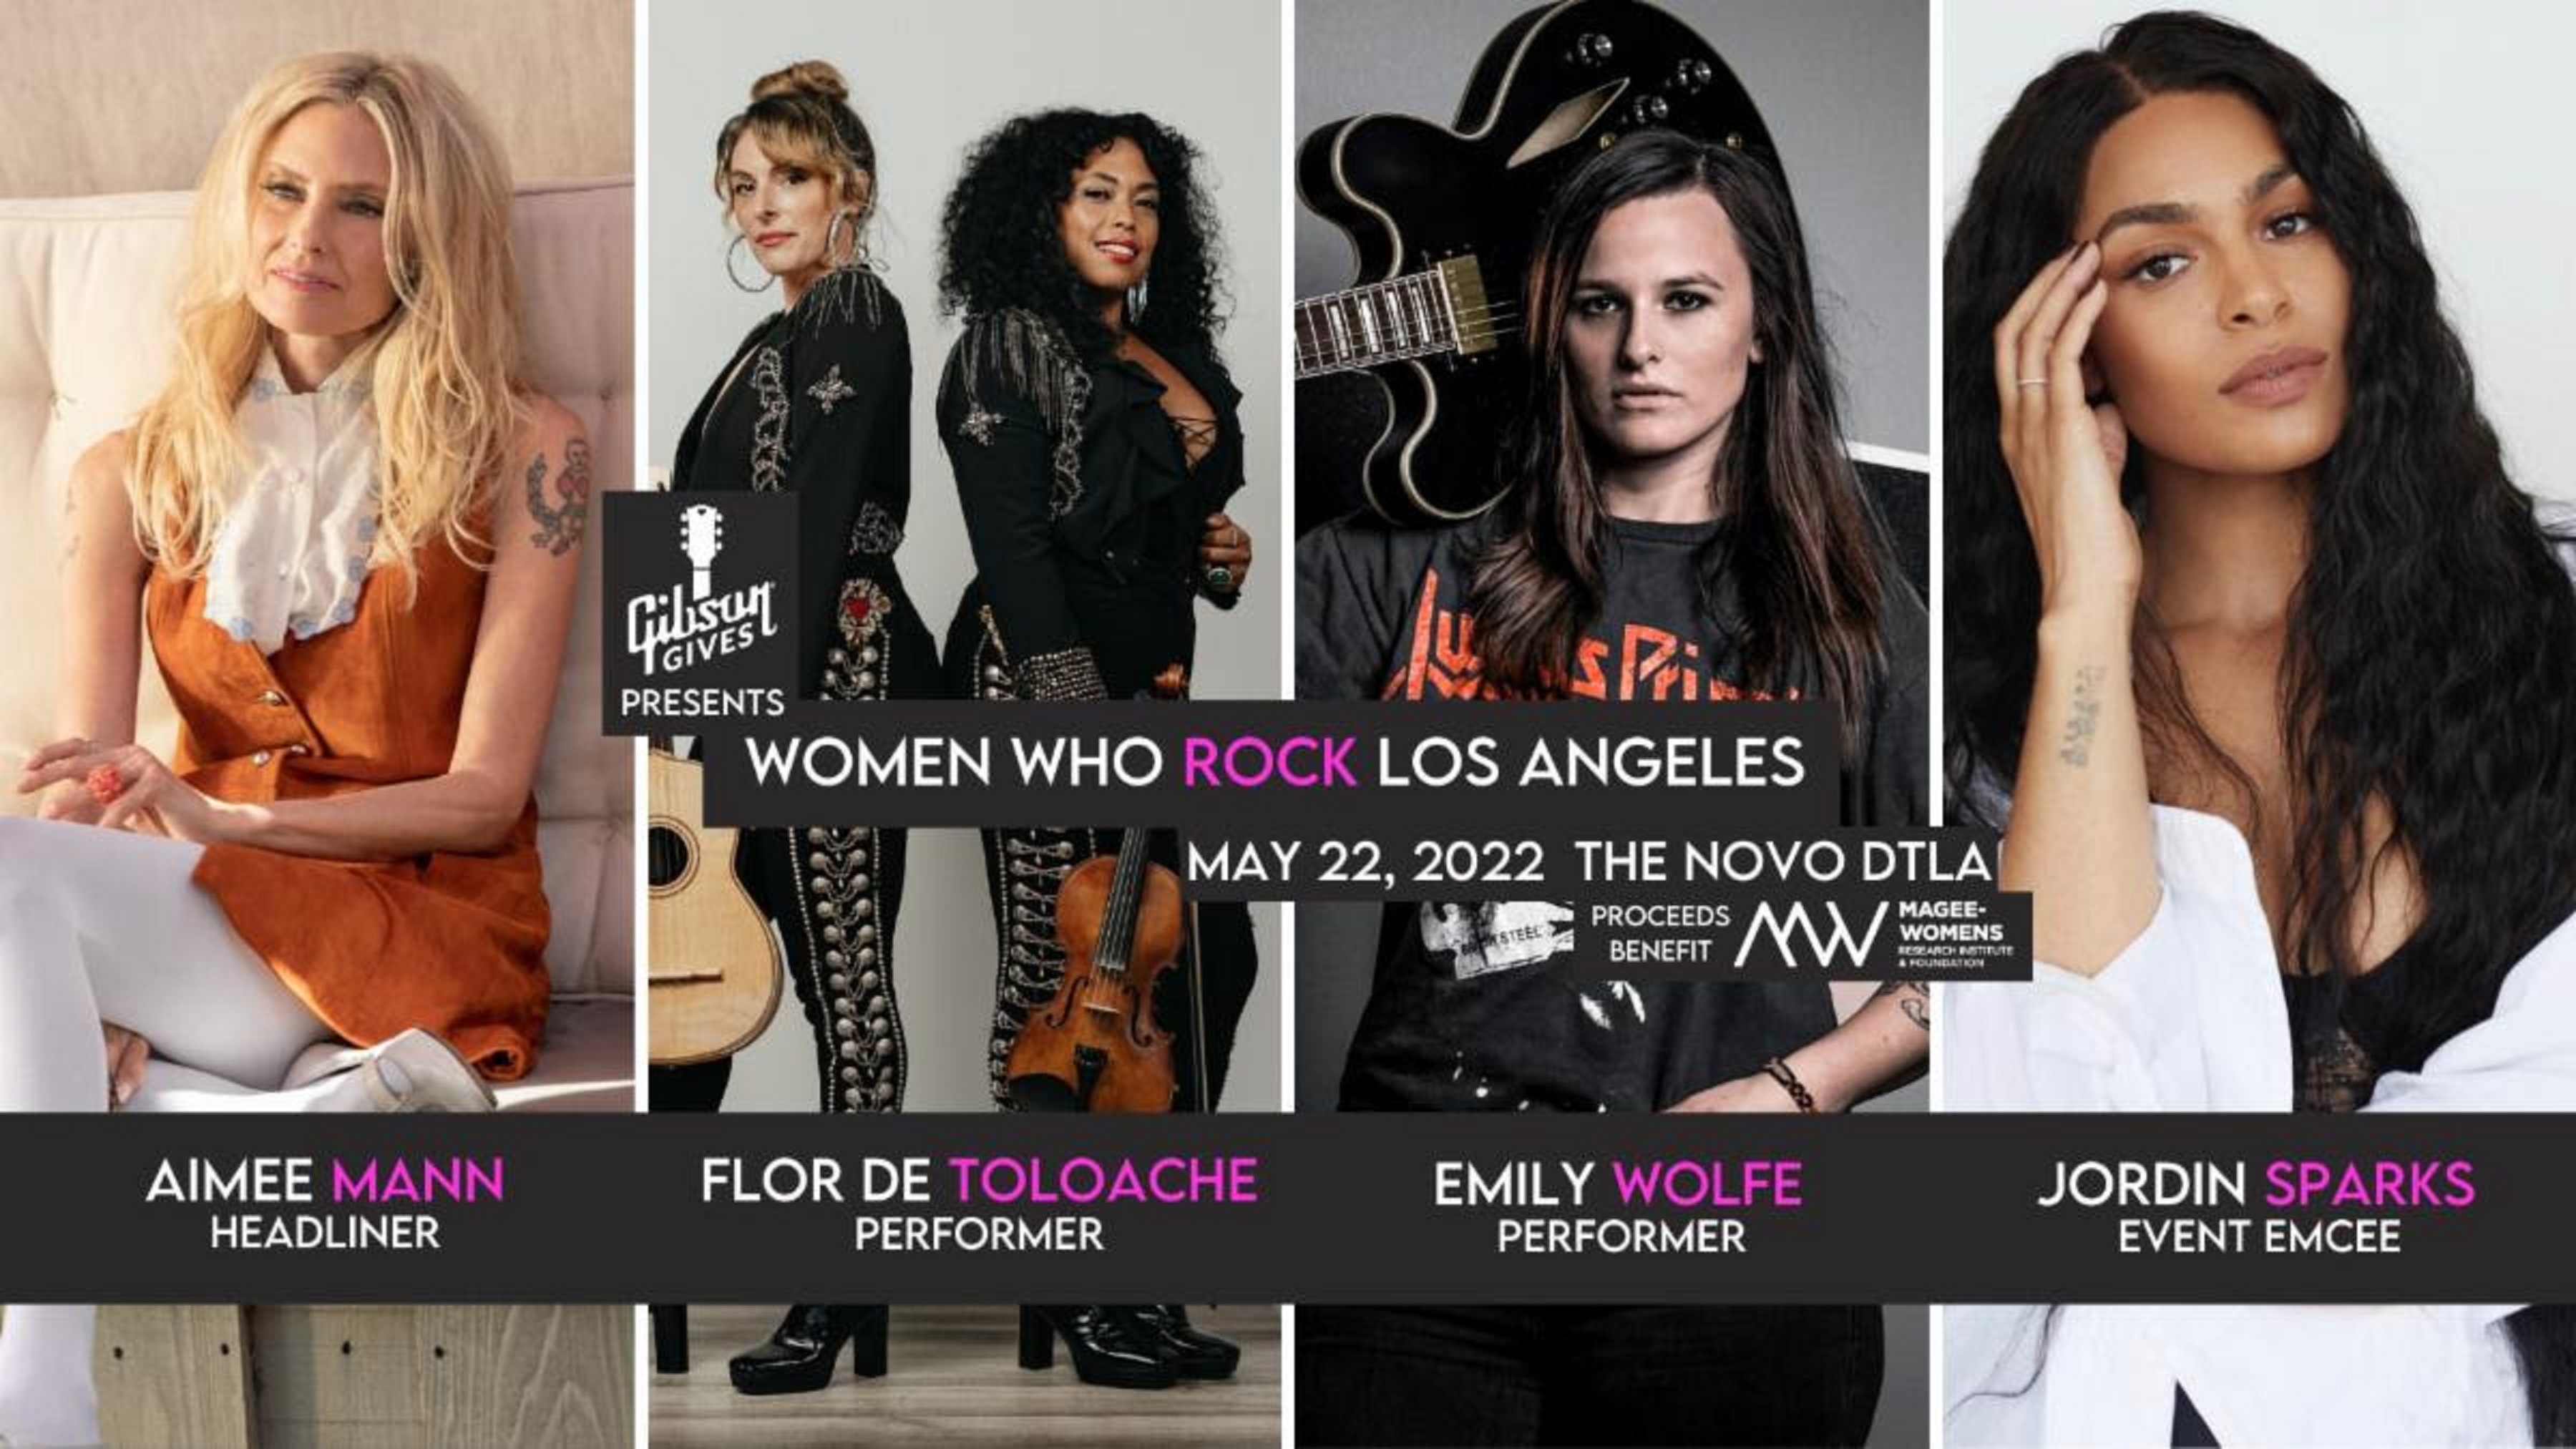 Aimee Mann to Headline Women Who Rock Benefit Concert, Tonight, Sunday, May 22 6:30p at THE NOVO